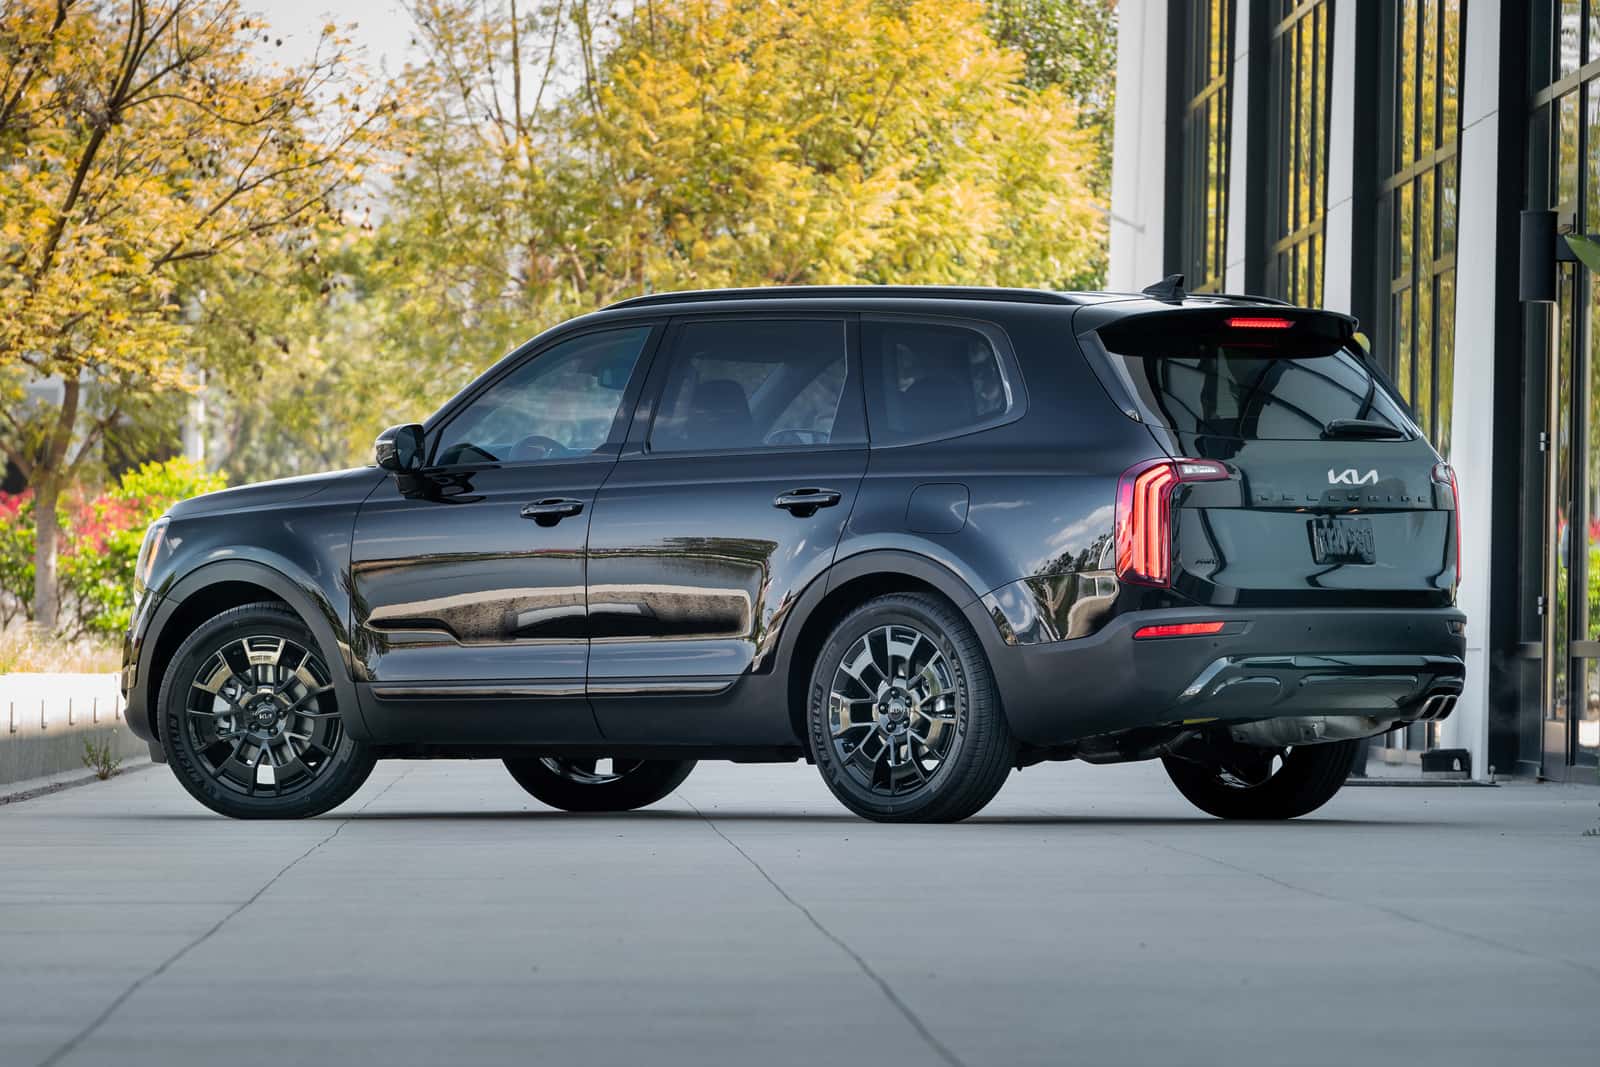 2022 Kia Telluride Unveiled With New Logo & More Standard Features